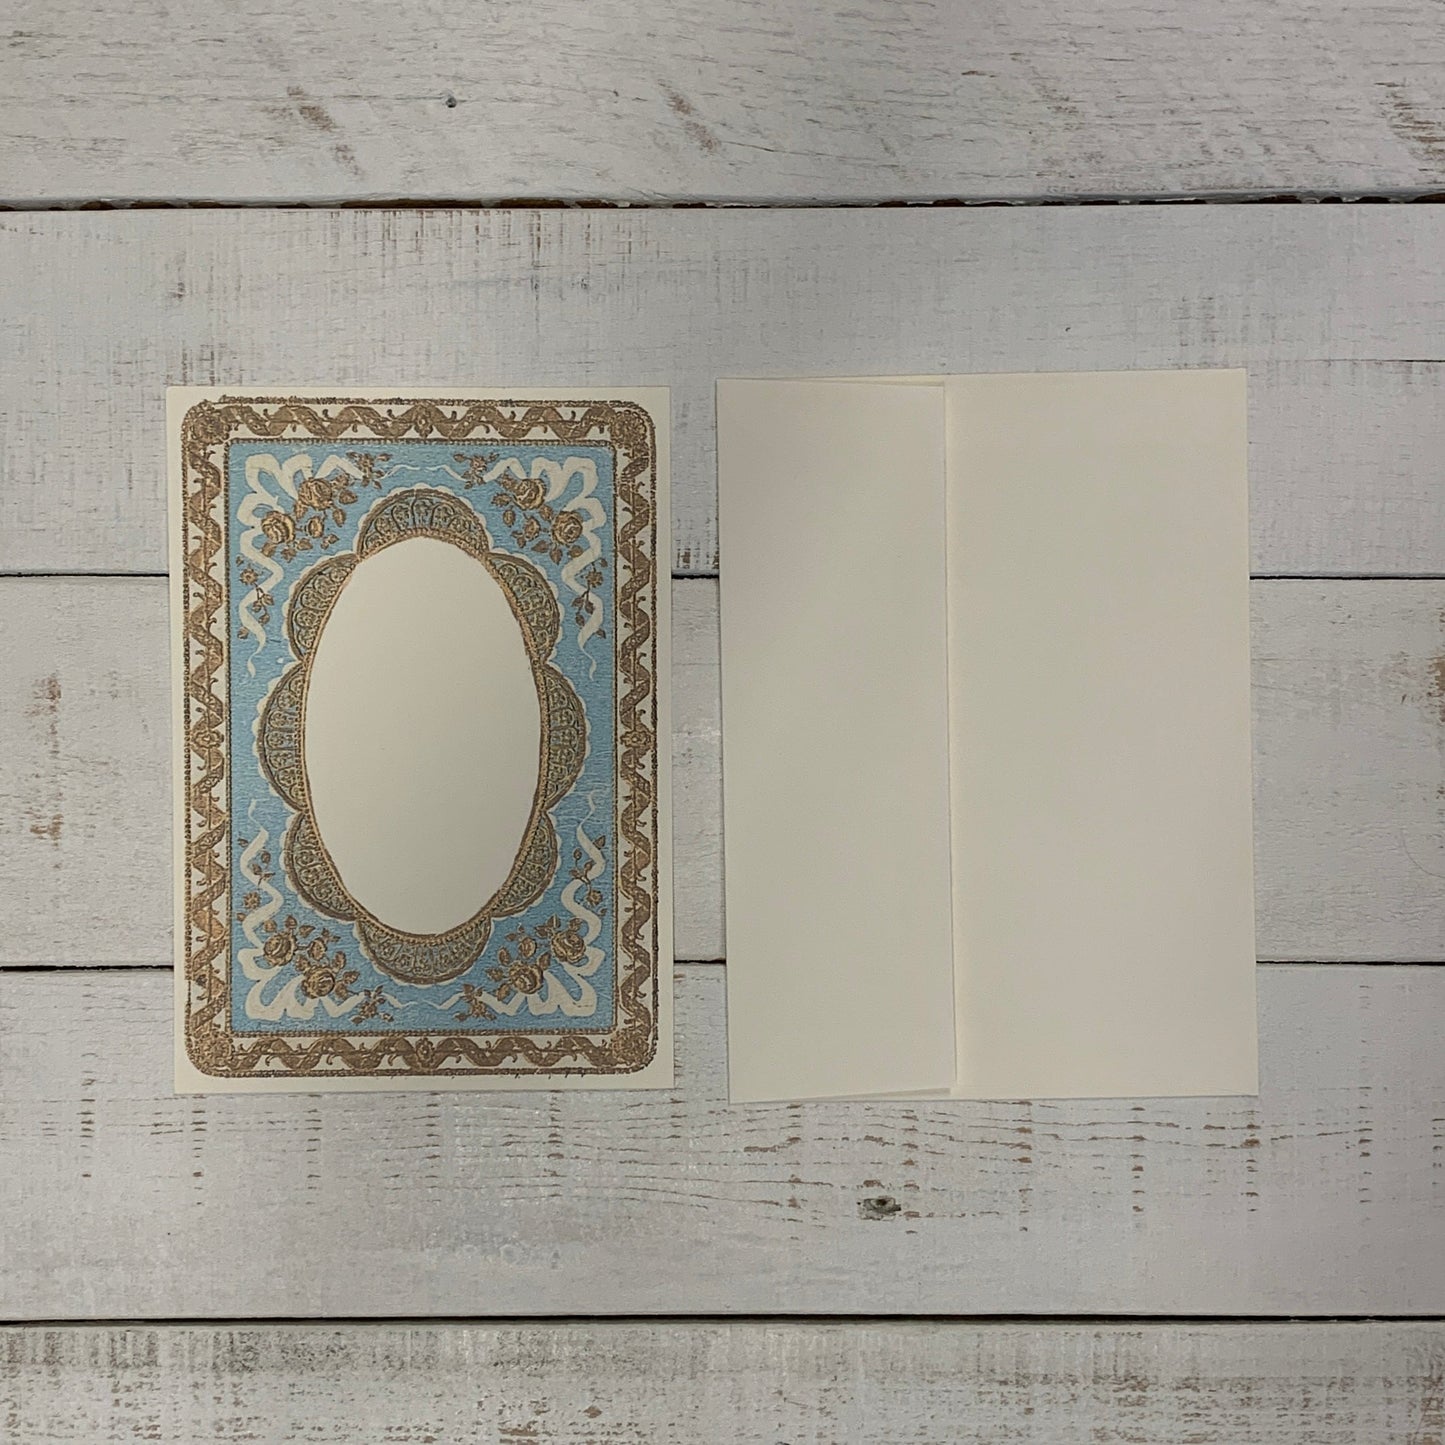 Set of 8 Single Sided Notecards Gold and Blue Ornate Frame